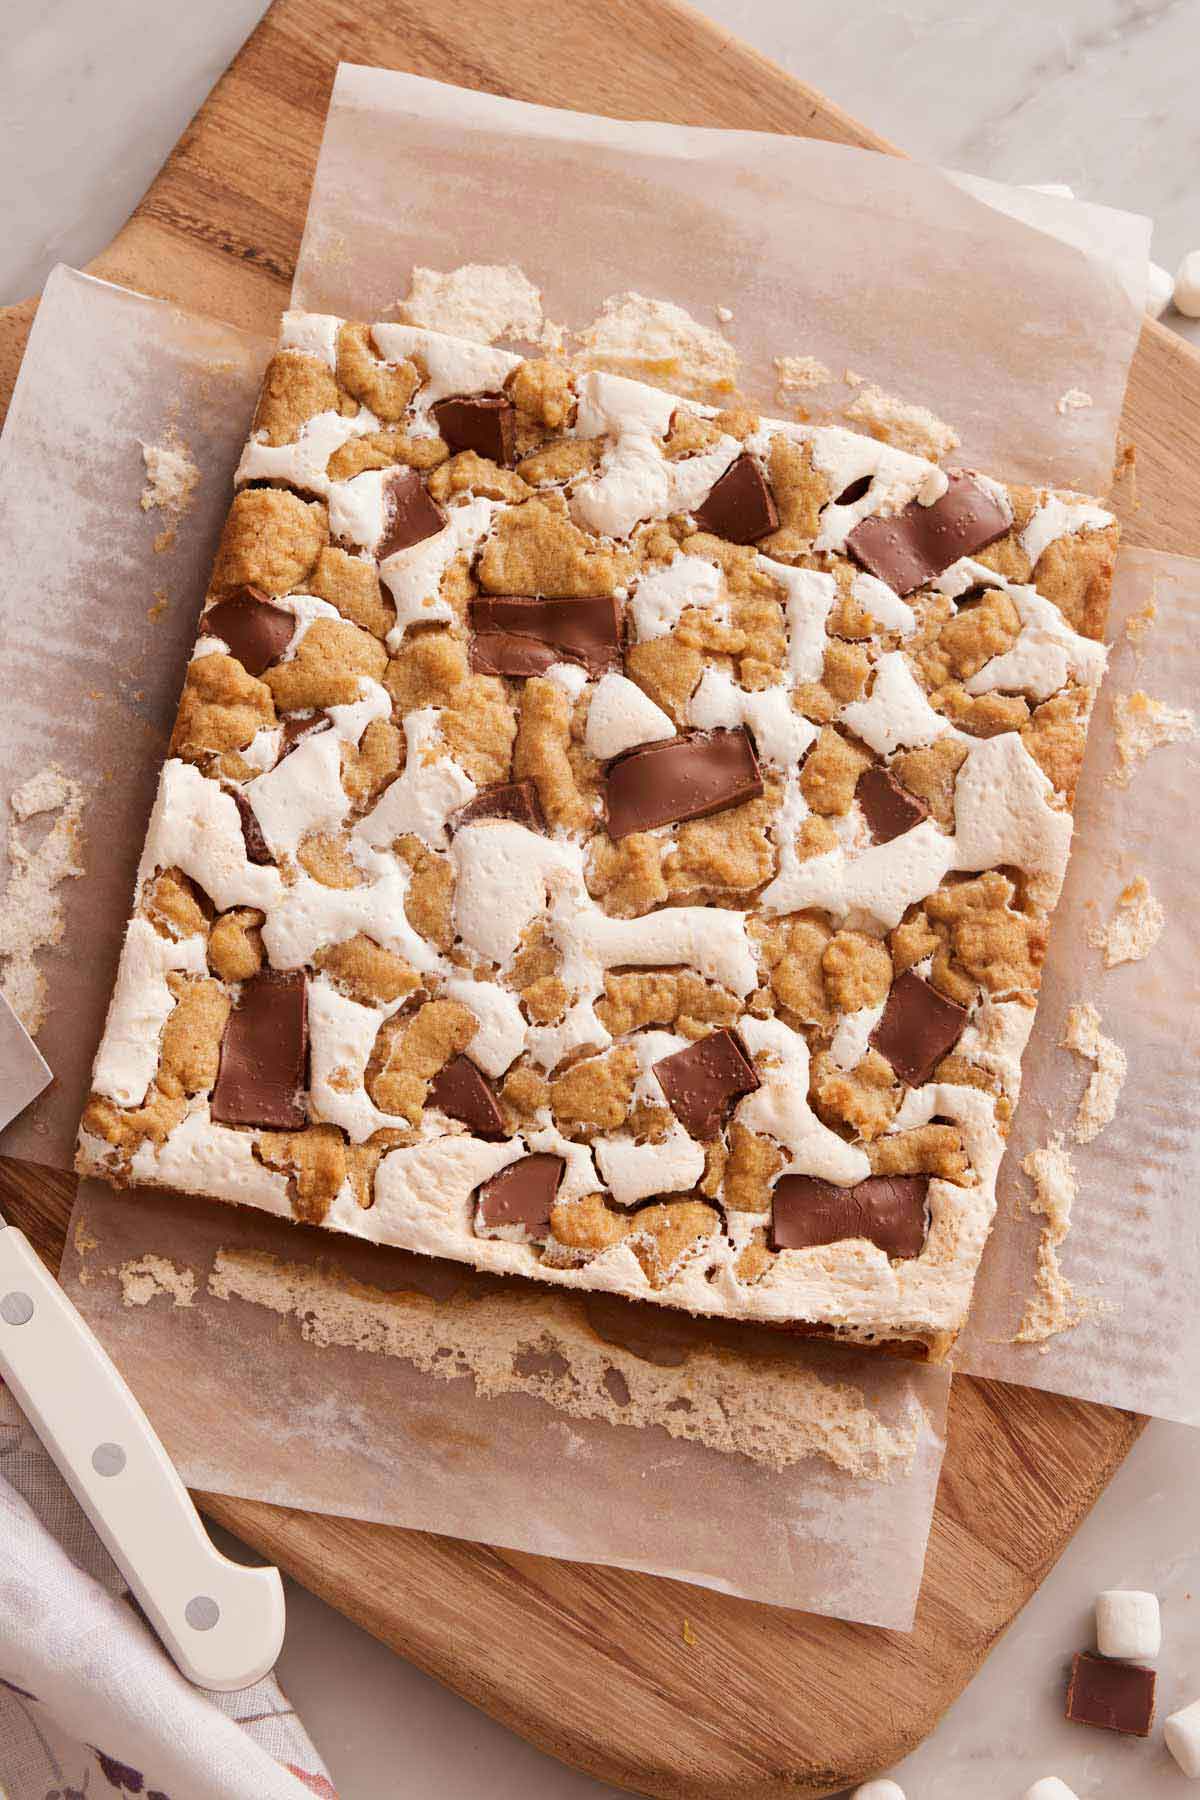 Overhead view of an uncut s'mores bars over parchment paper on a wooden serving board.